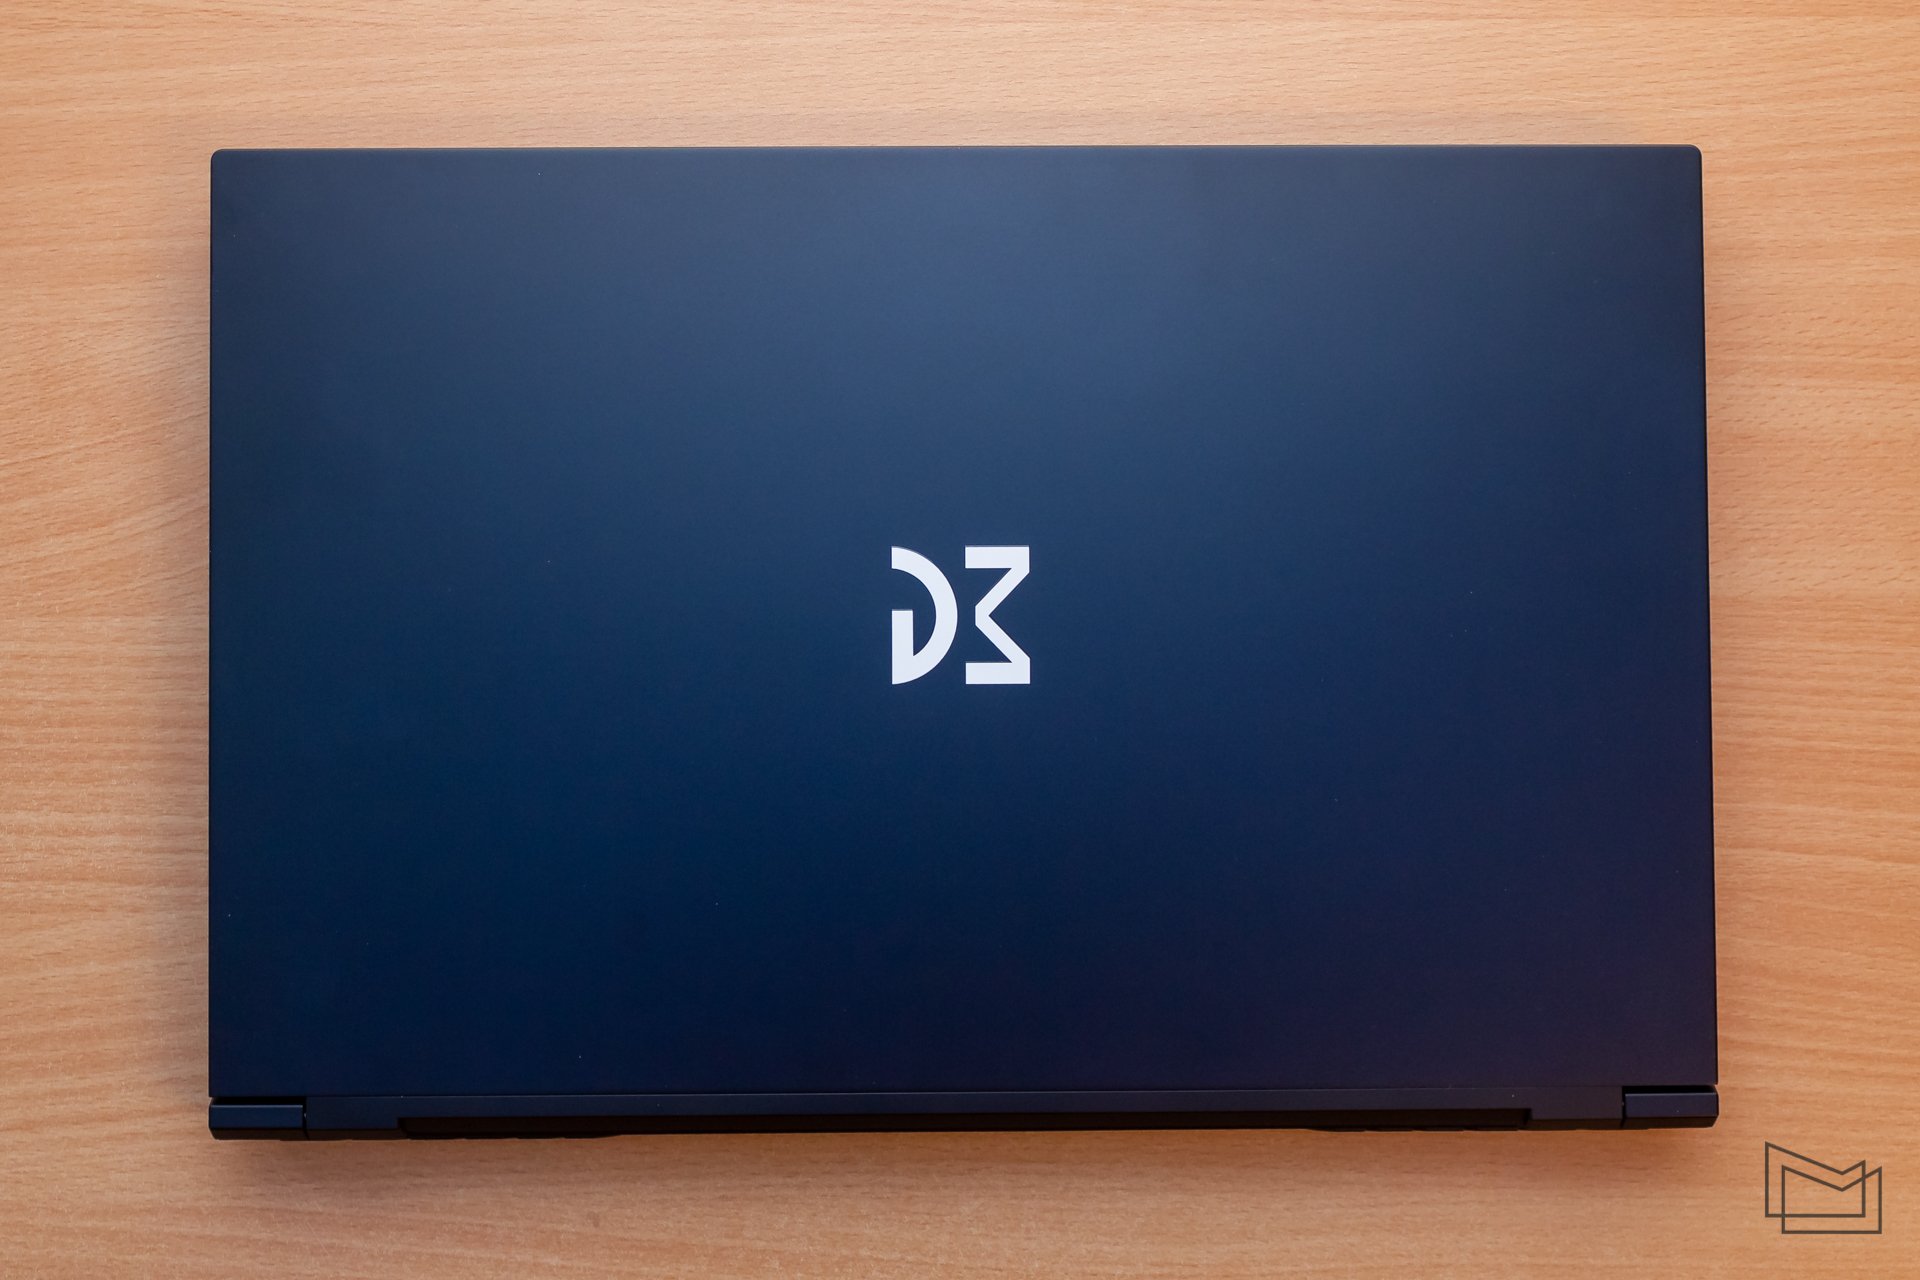 Dream Machines RS3080-17UA51 - a review of a powerful gaming laptop